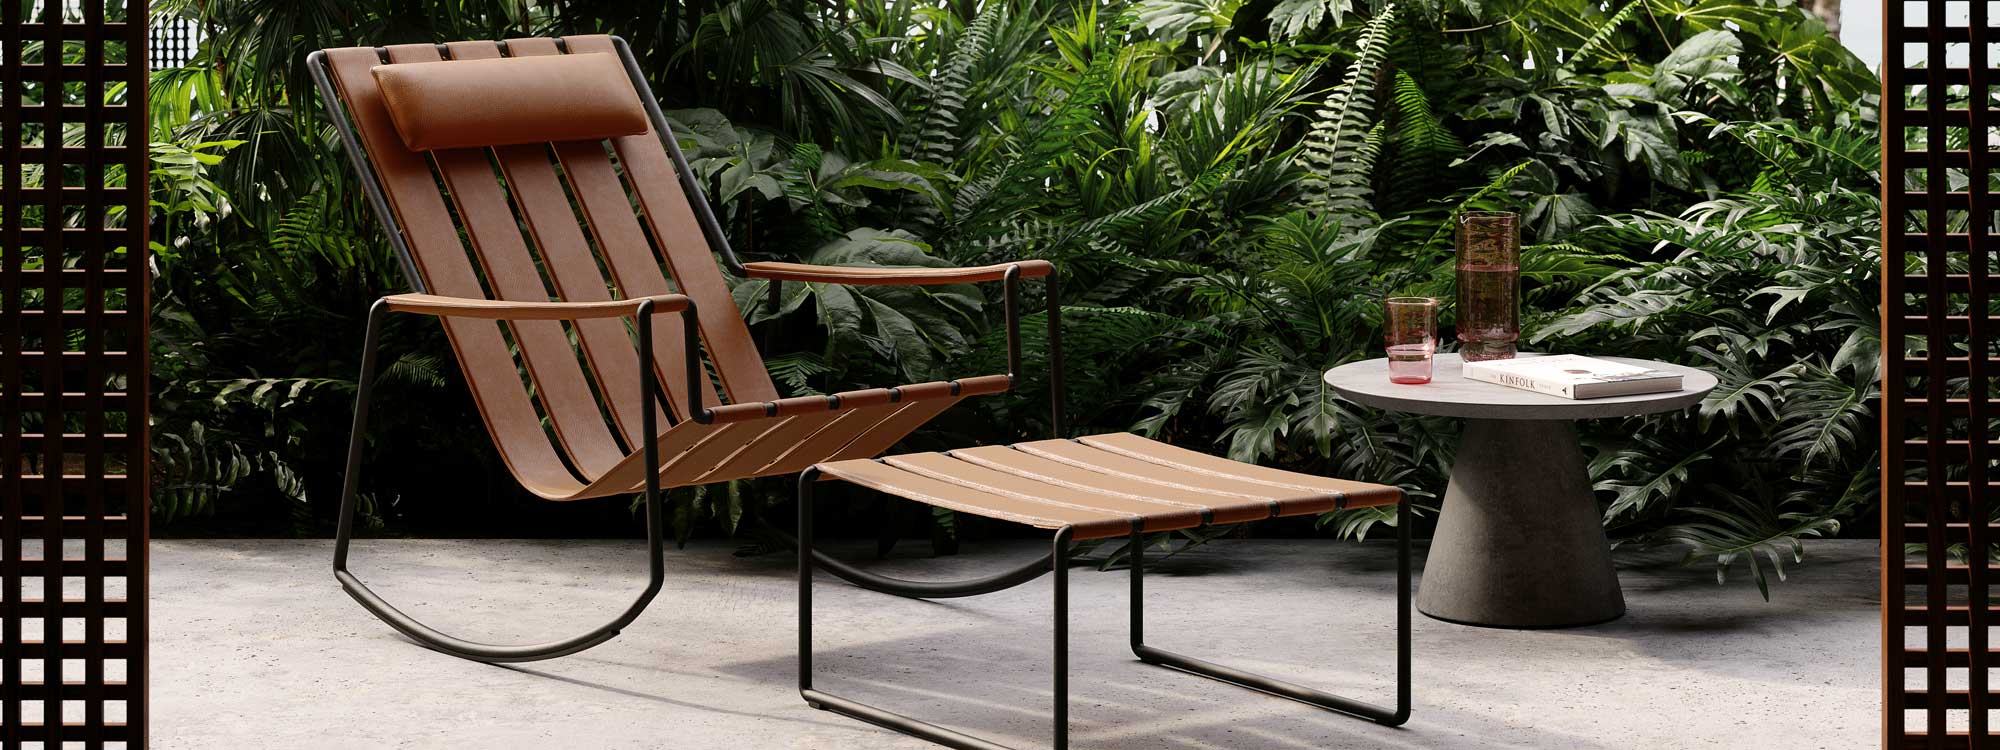 Image of Strappy contemporary garden rocking chair and foot rest by Royal Botania